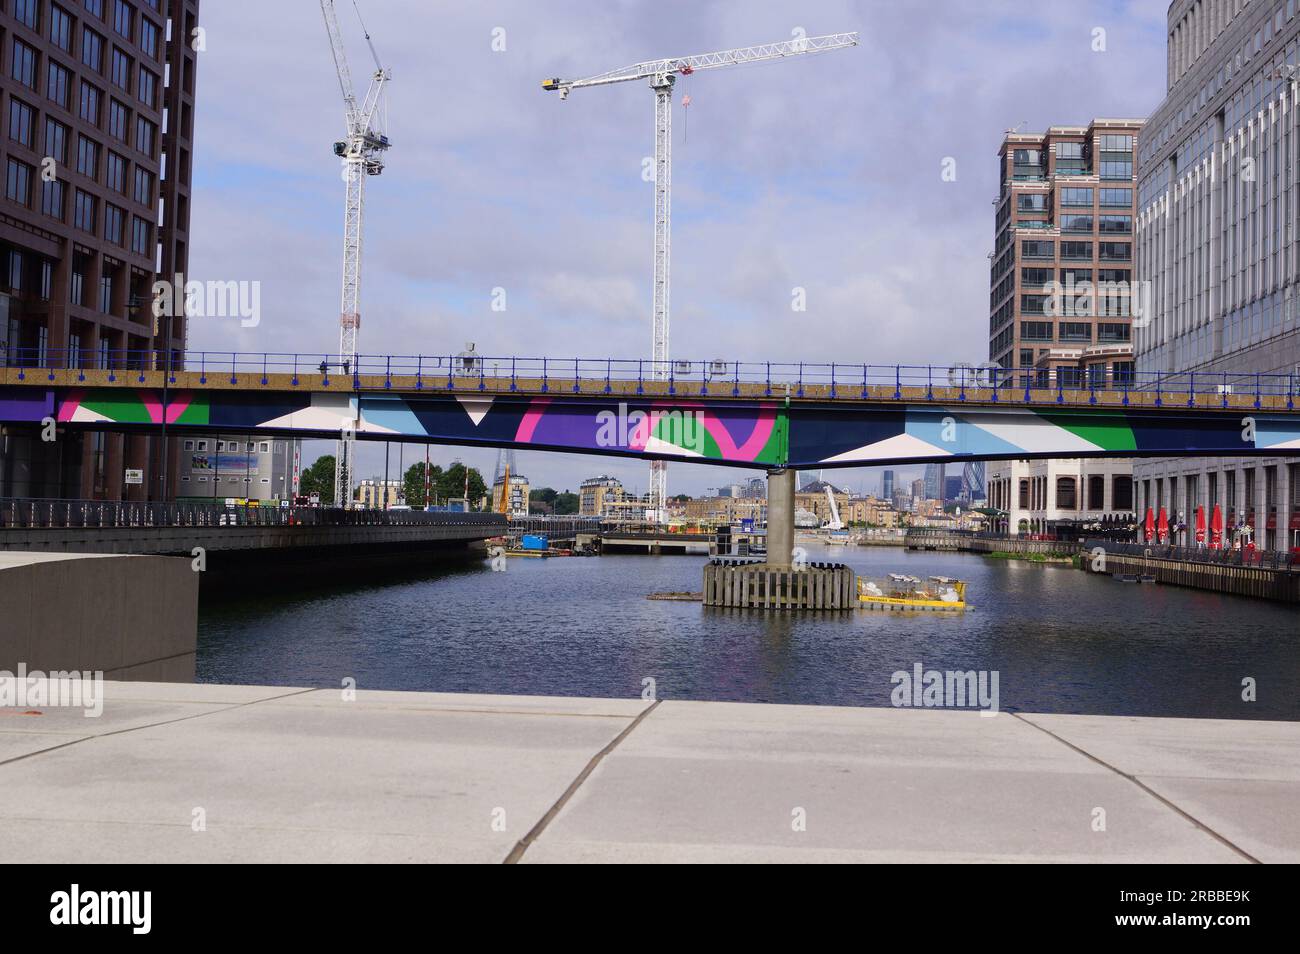 London, UK: bridge of the DLR (Docklands Light Railway) crossing Middle Dock in Canary Wharf, Tower Hamlets Stock Photo